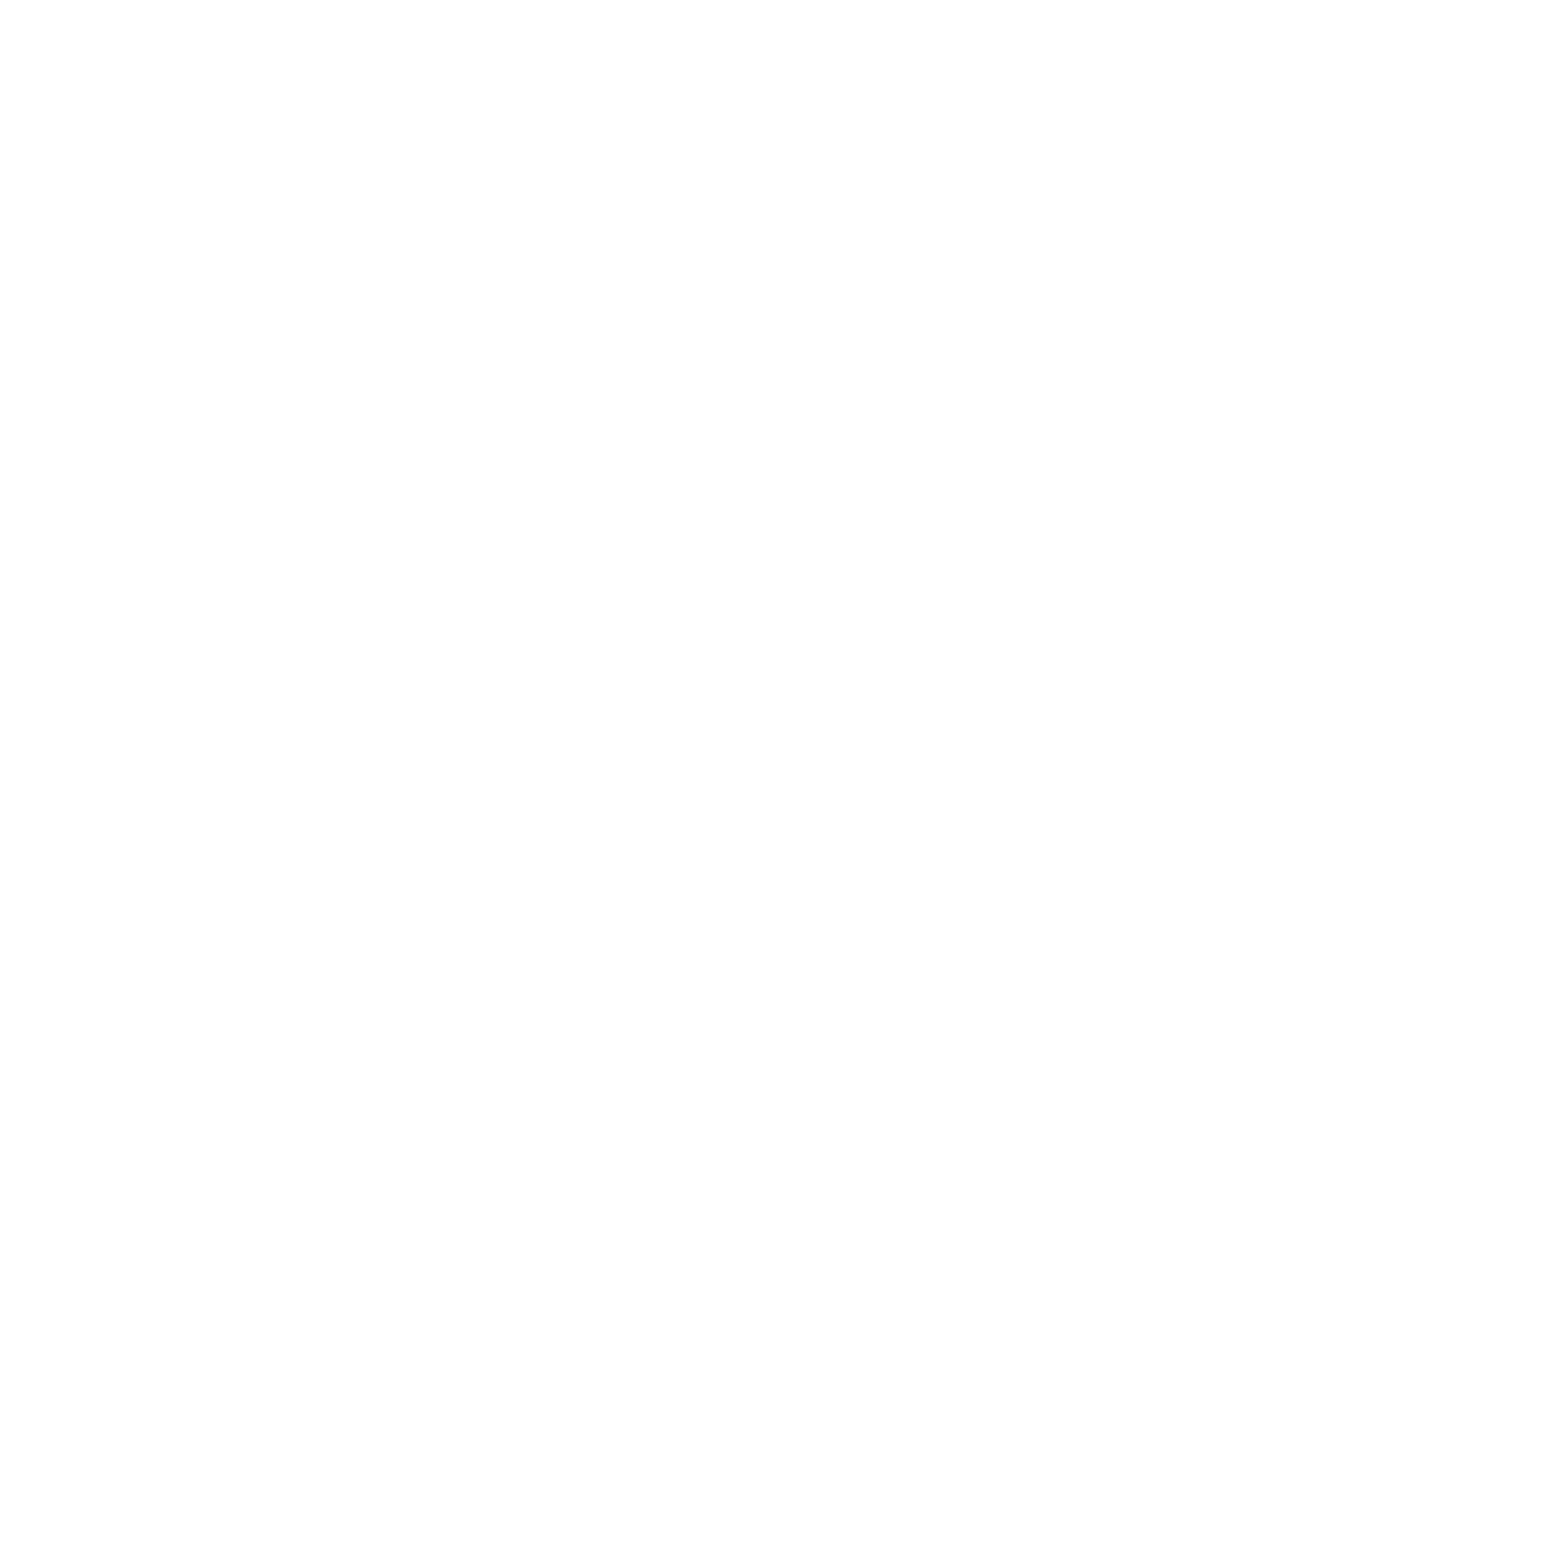 Northann Corp logo for dark backgrounds (transparent PNG)